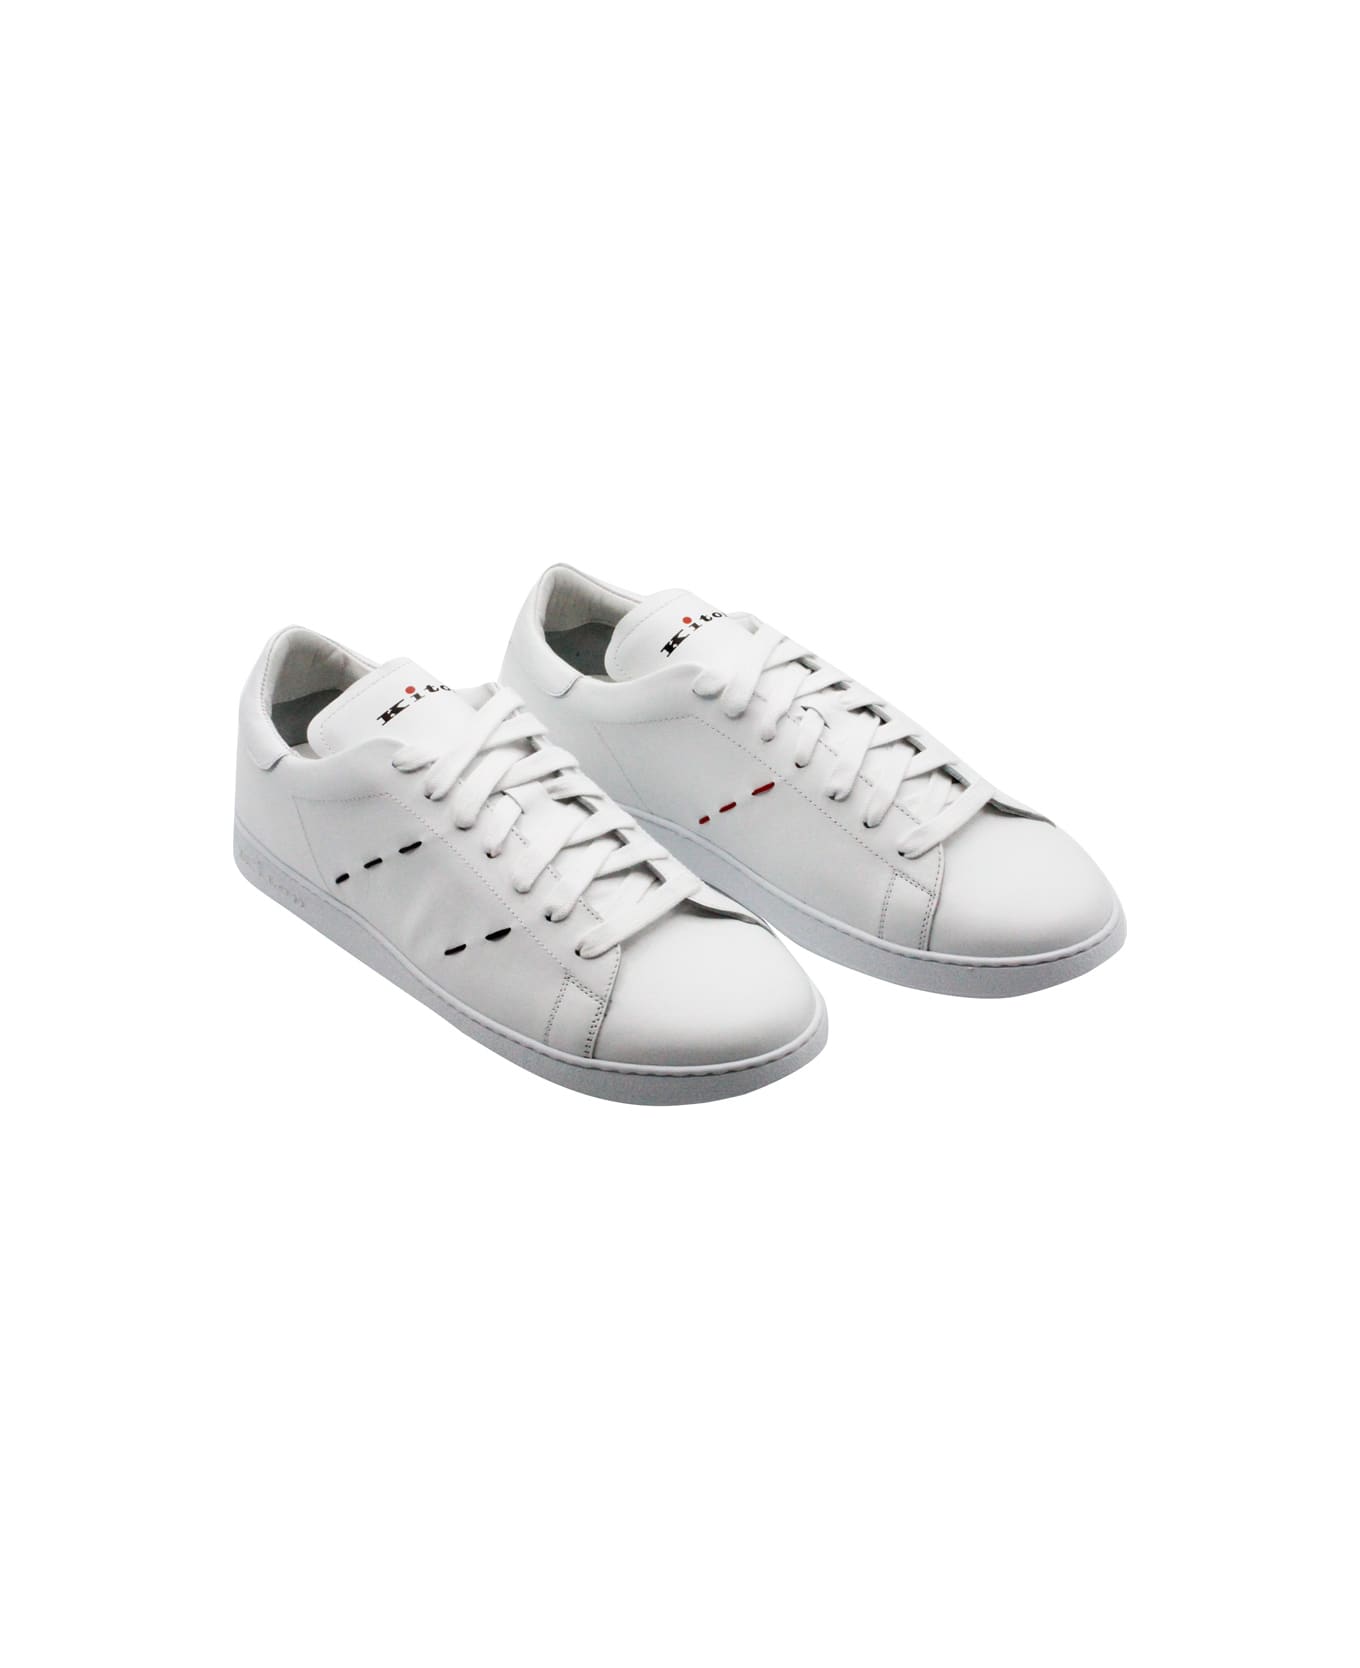 Kiton Lightweight Sneaker Shoe In Soft Leather With Contrasting Color Finishes And Stitching. Tongue With Logo Print And Lace Closure. - White スニーカー